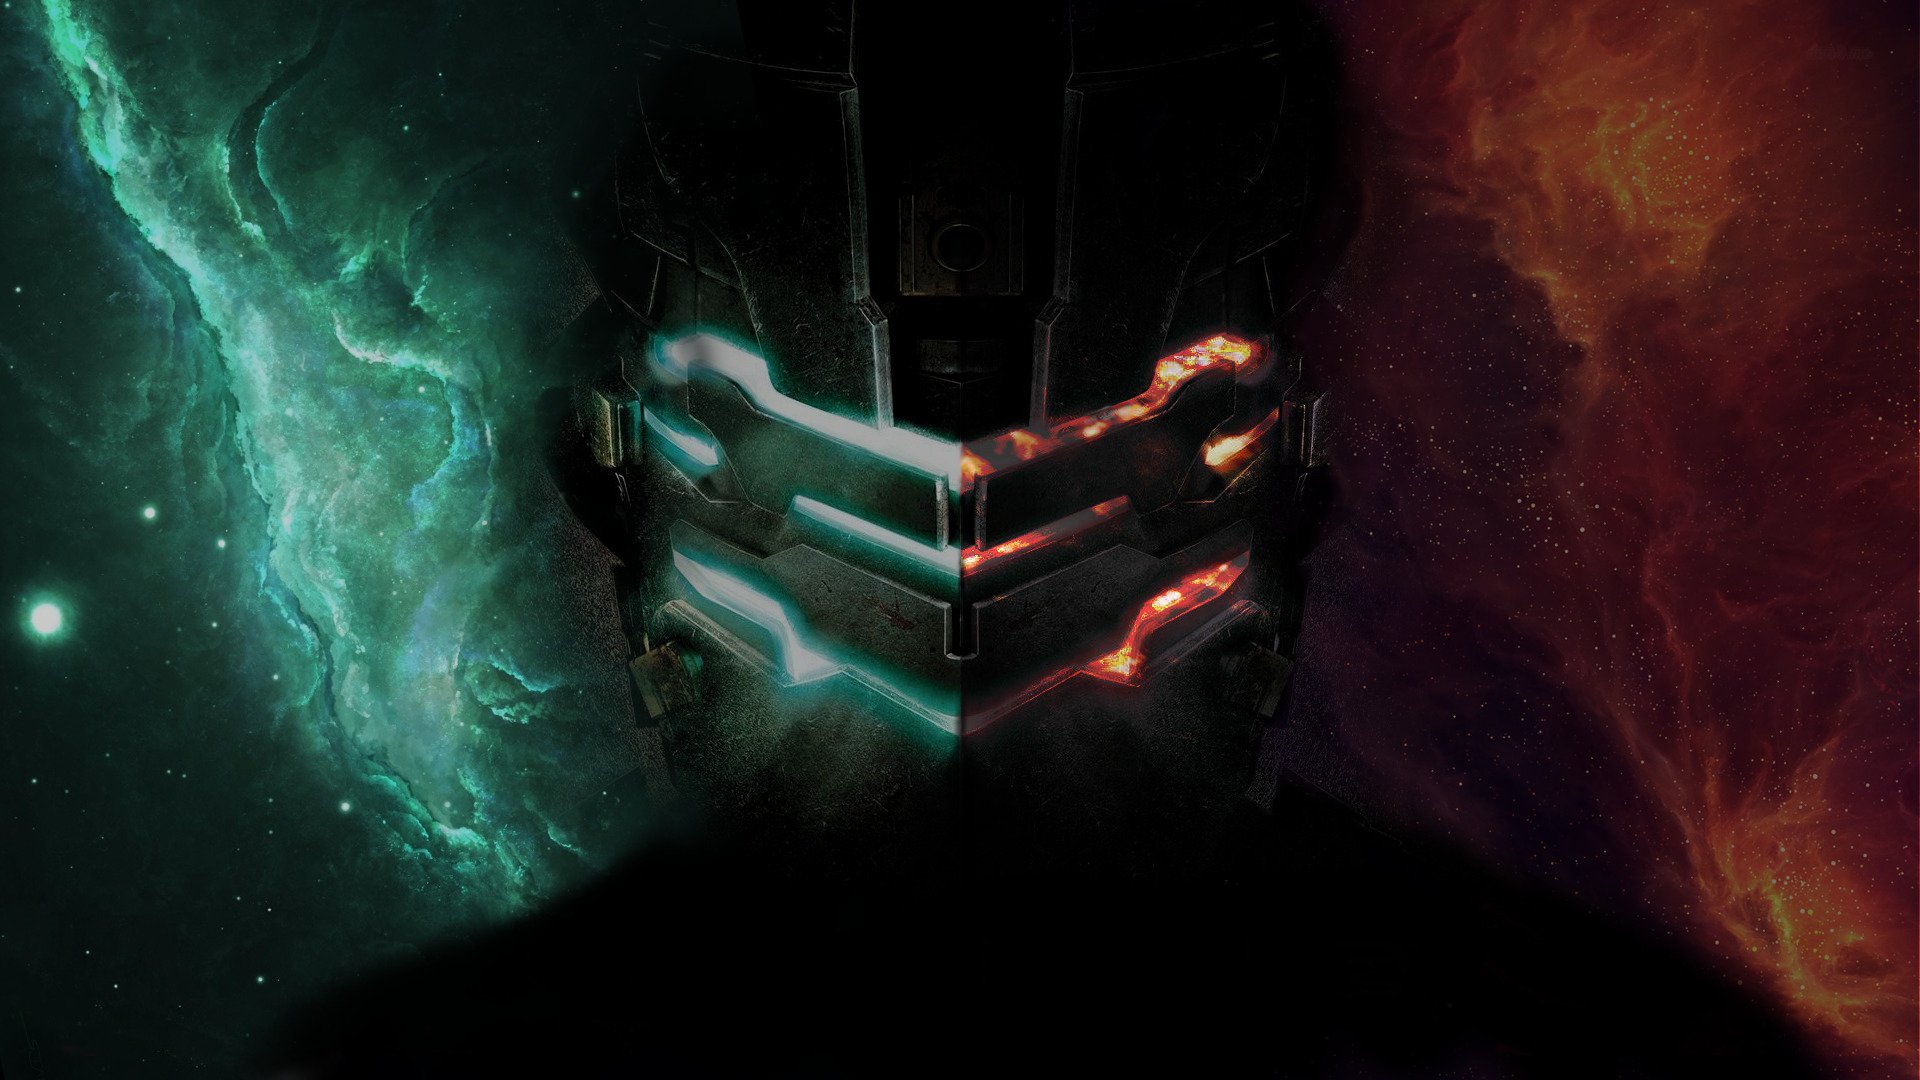 dead space wallpaper hd,darkness,cg artwork,digital compositing,space,fictional character